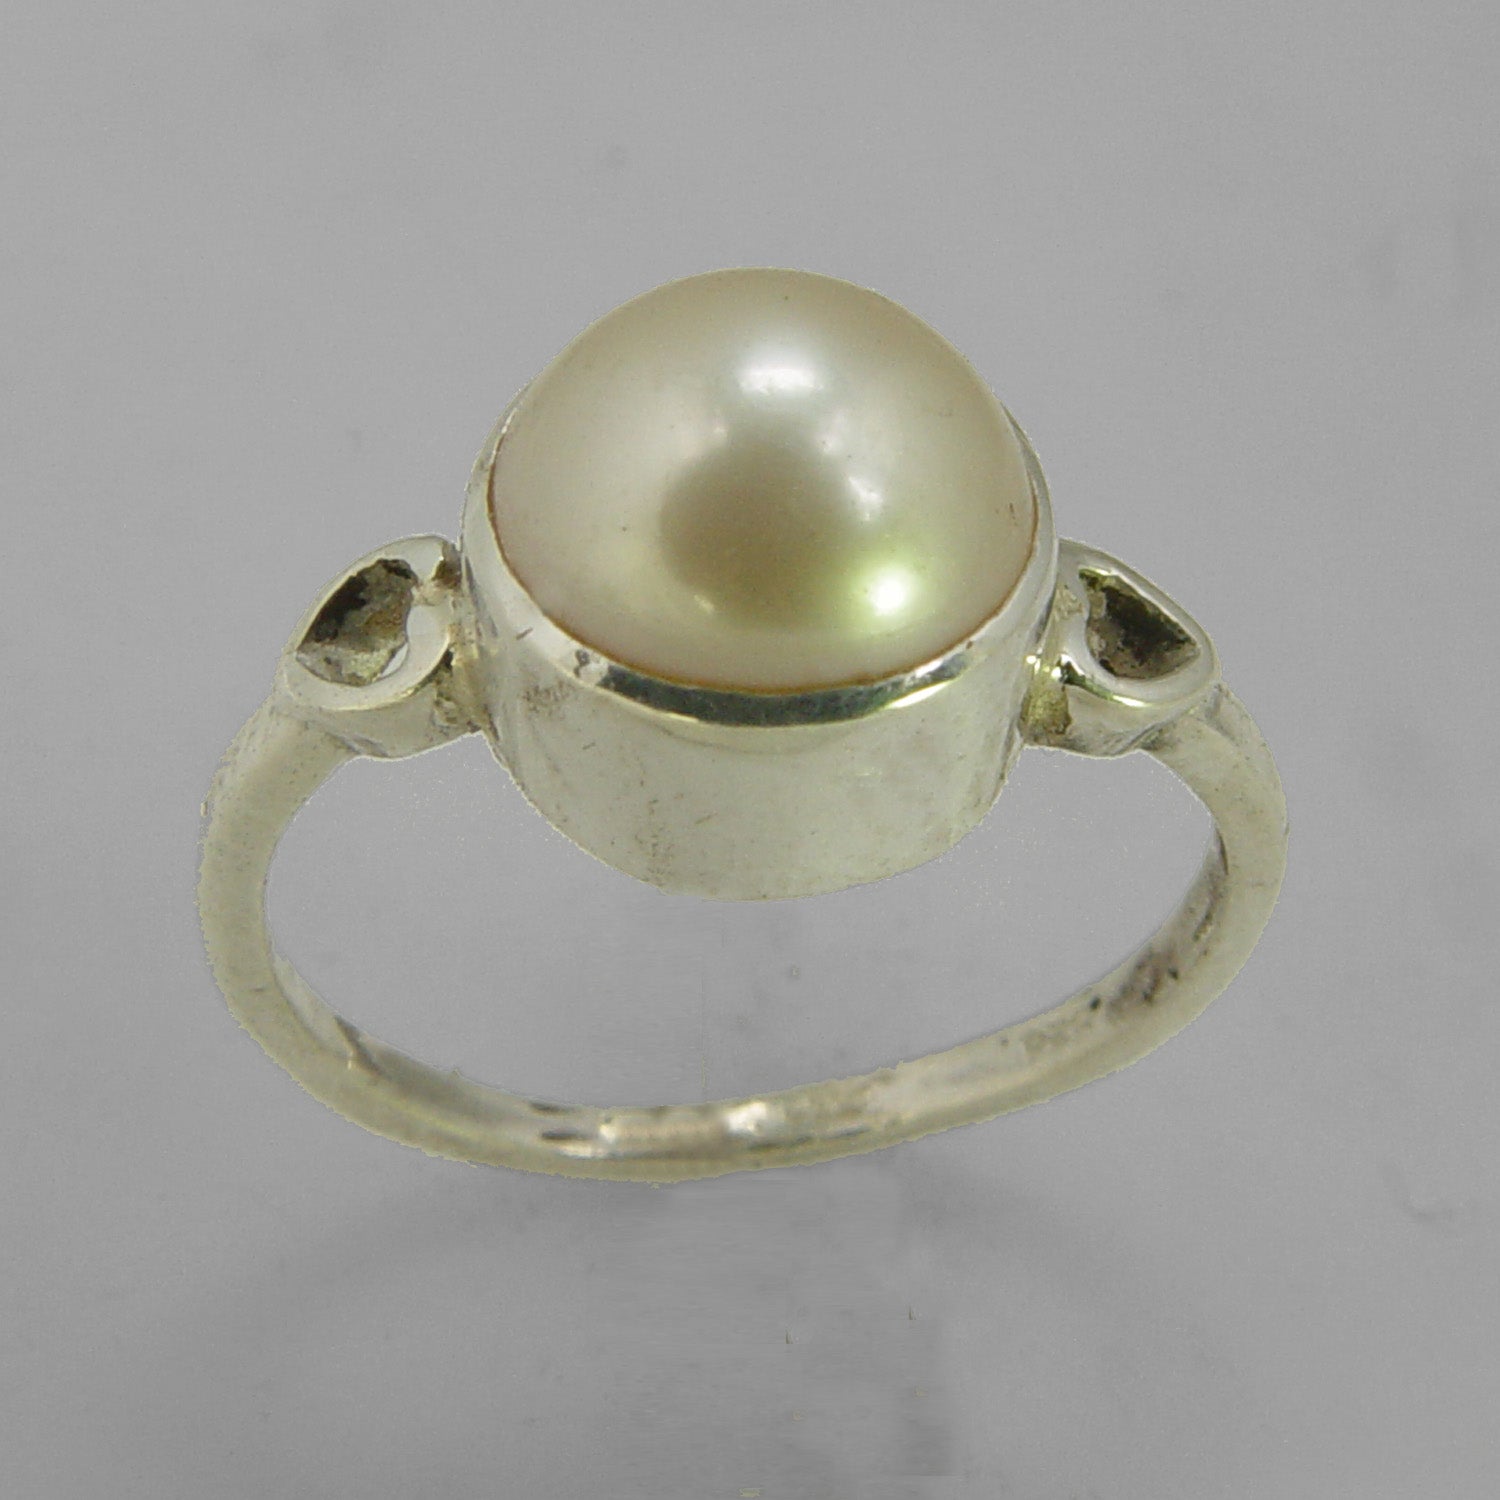 Pearl 5.2 ct Freshwater Pearl Heart Shank Set Sterling Silver Ring, Size 7